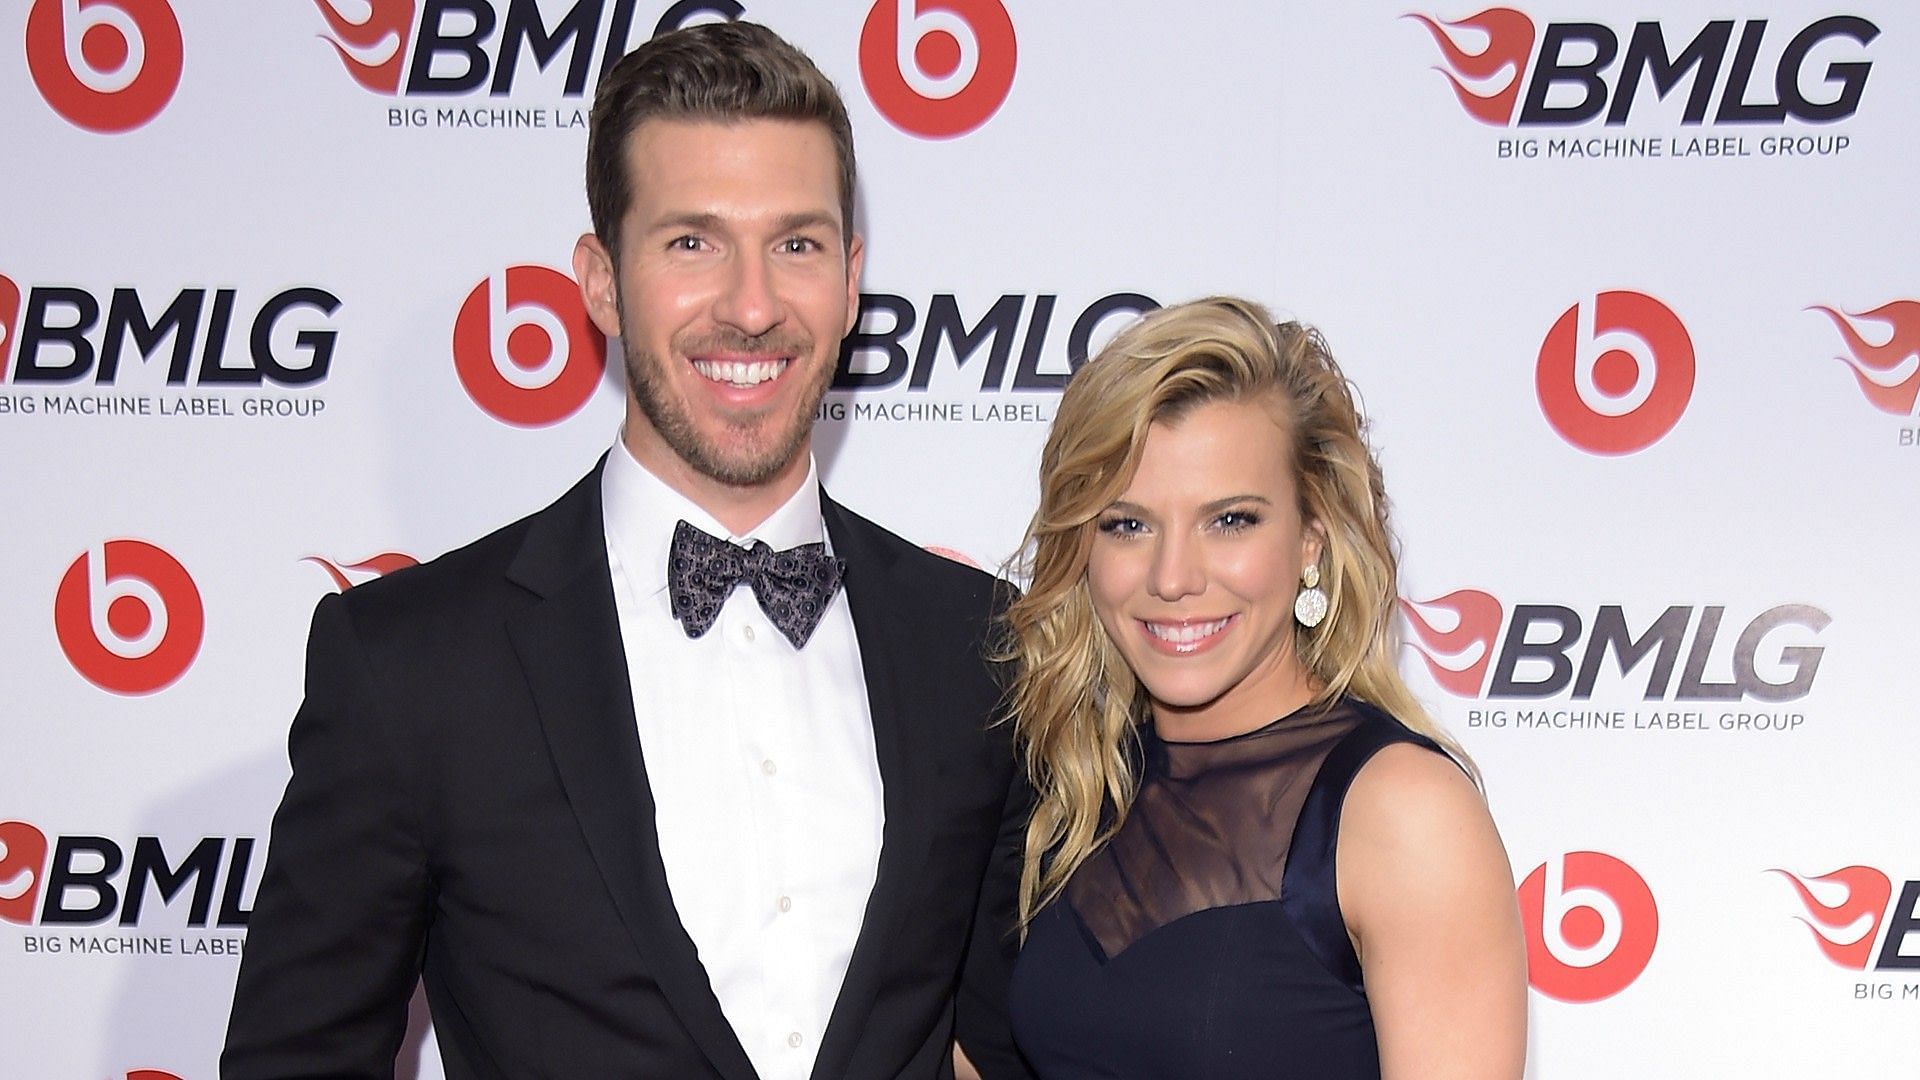 Kimberly Perry with ex-husband J.P. Arencibia (Image via Michael Loccisano/Getty Images)